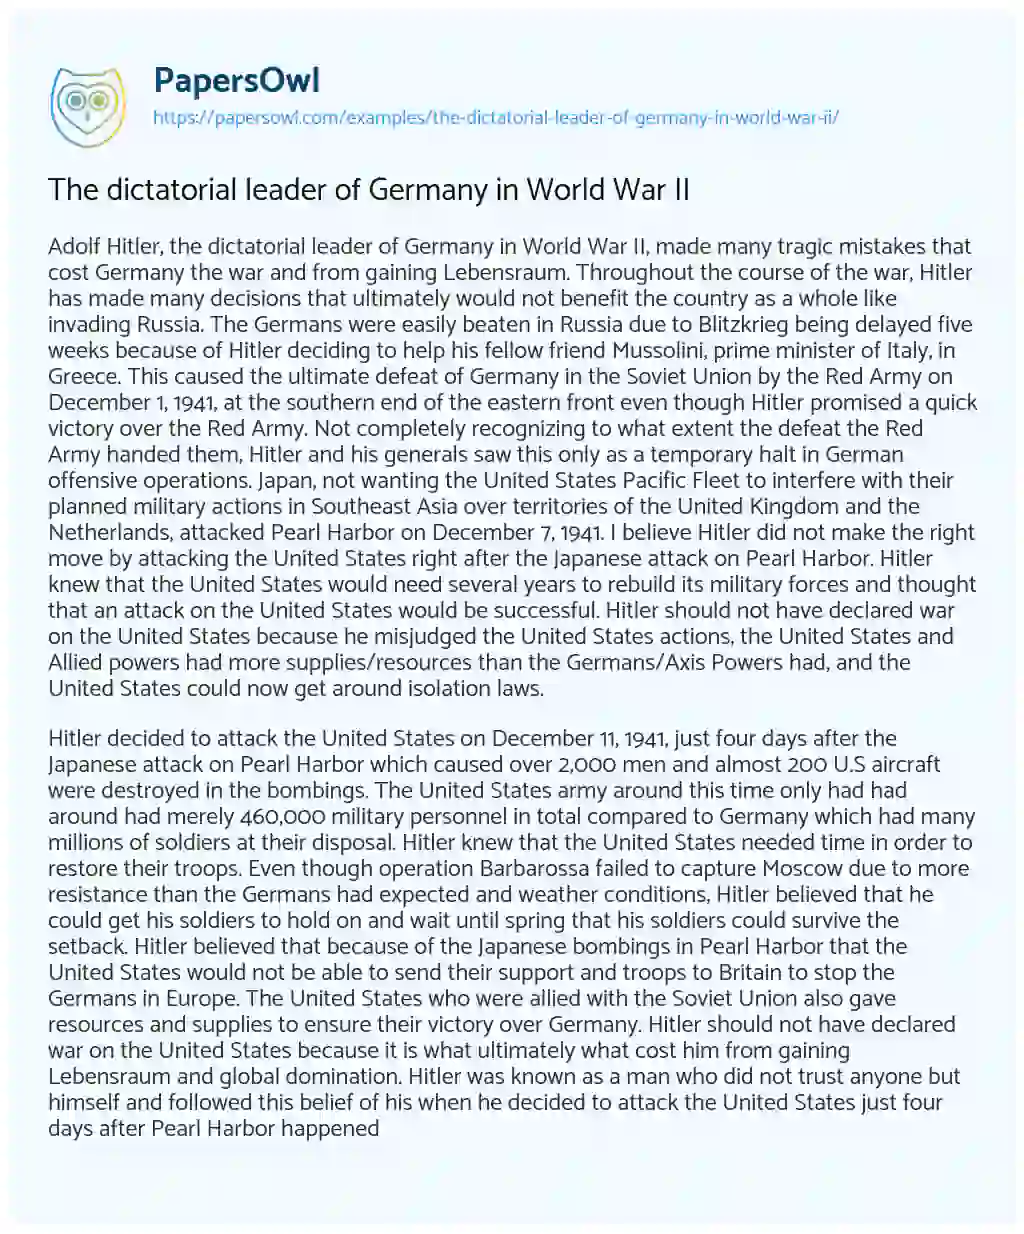 Essay on The Dictatorial Leader of Germany in World War II